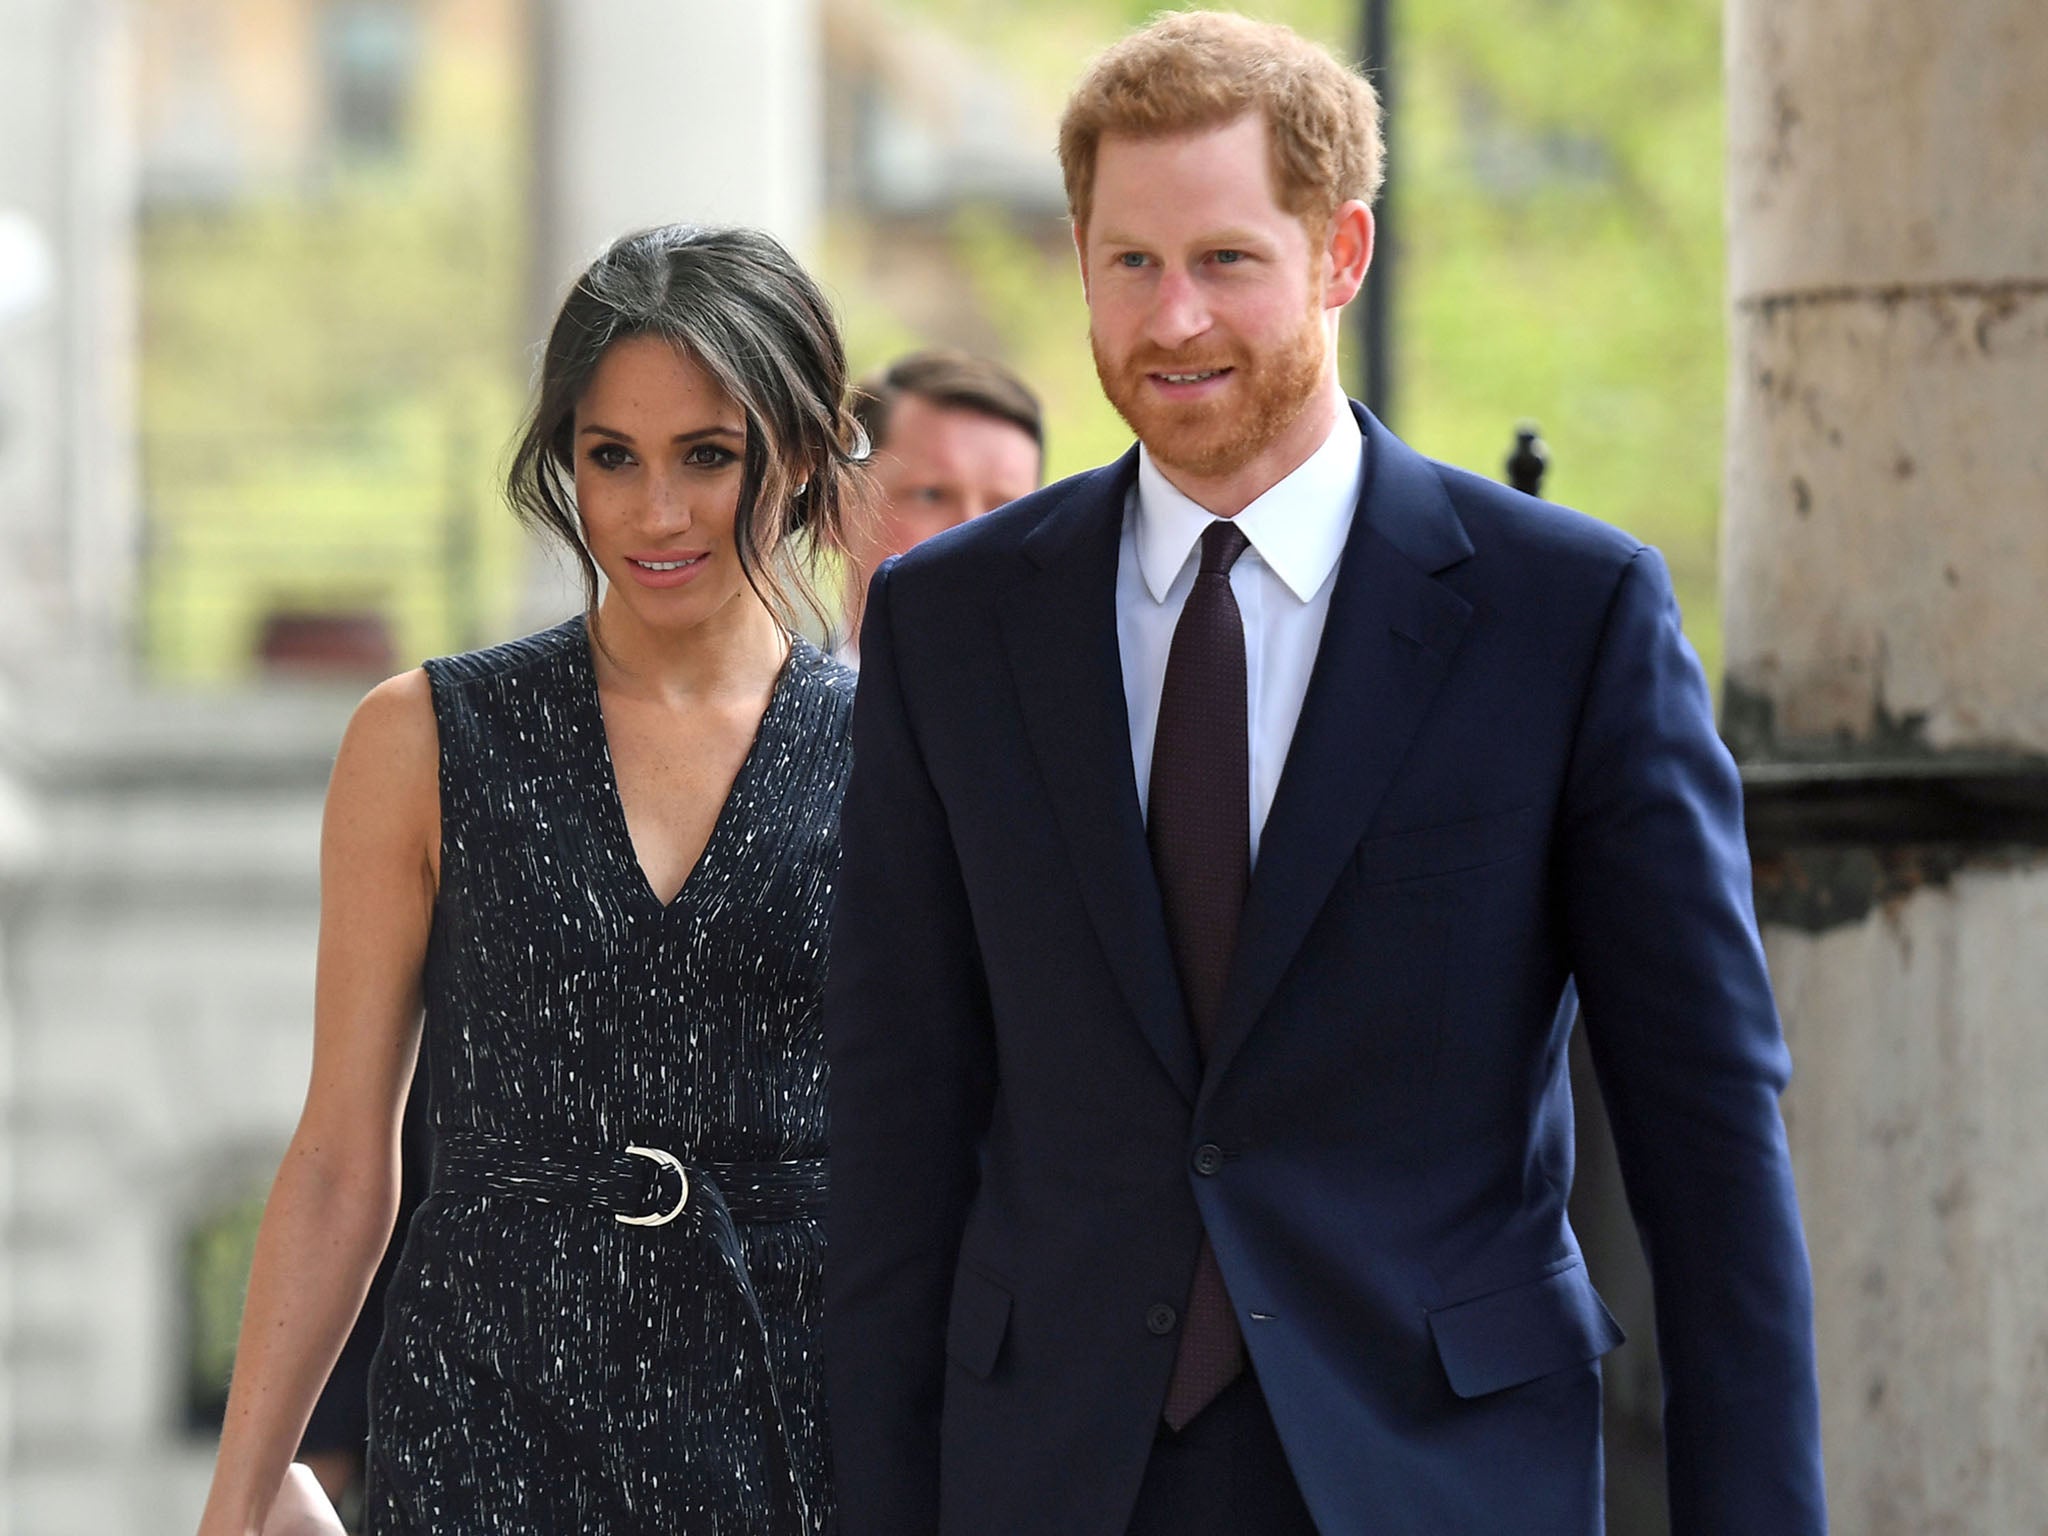 Royal rip-off: the monarchy already costs us a fortune, never mind shelling out for Prince Harry and Meghan Markle's big day